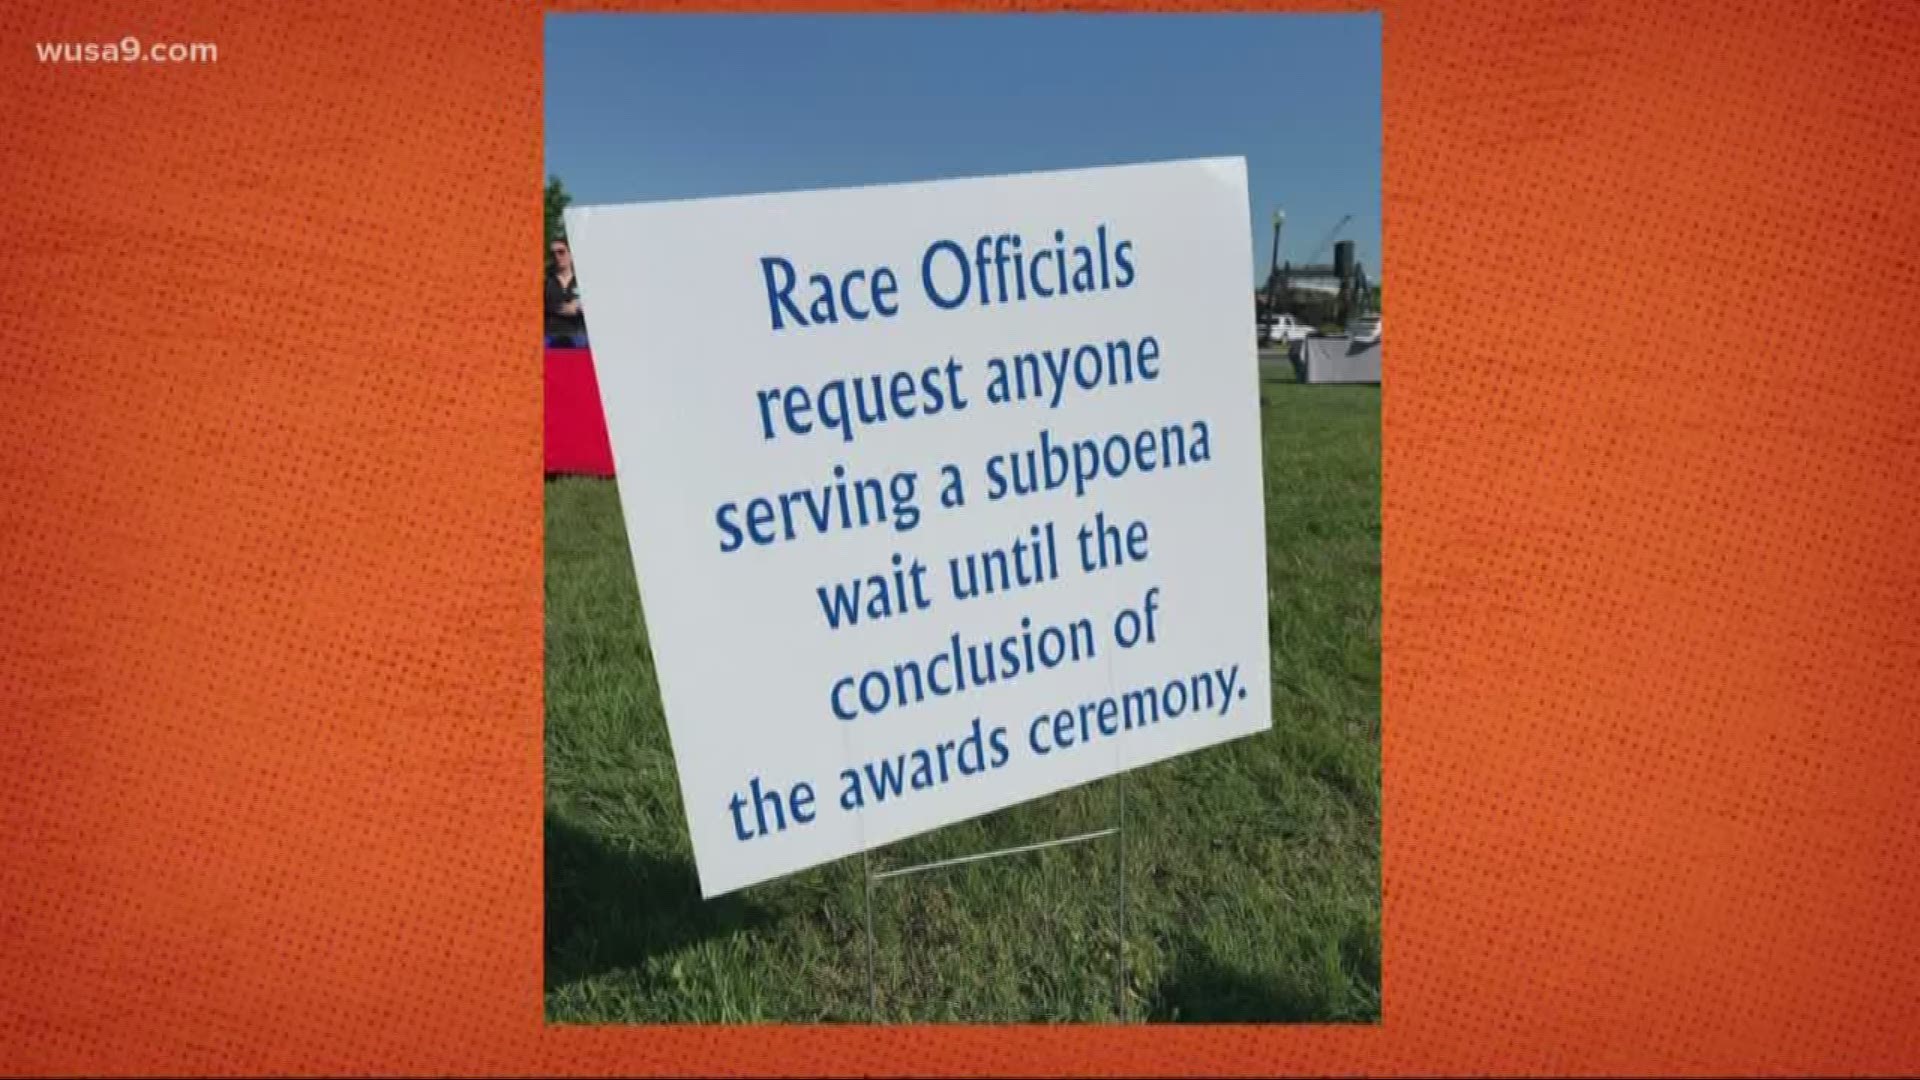 'Race officials request anyone serving a subpoena to wait until the conclusion of the awards ceremony.'